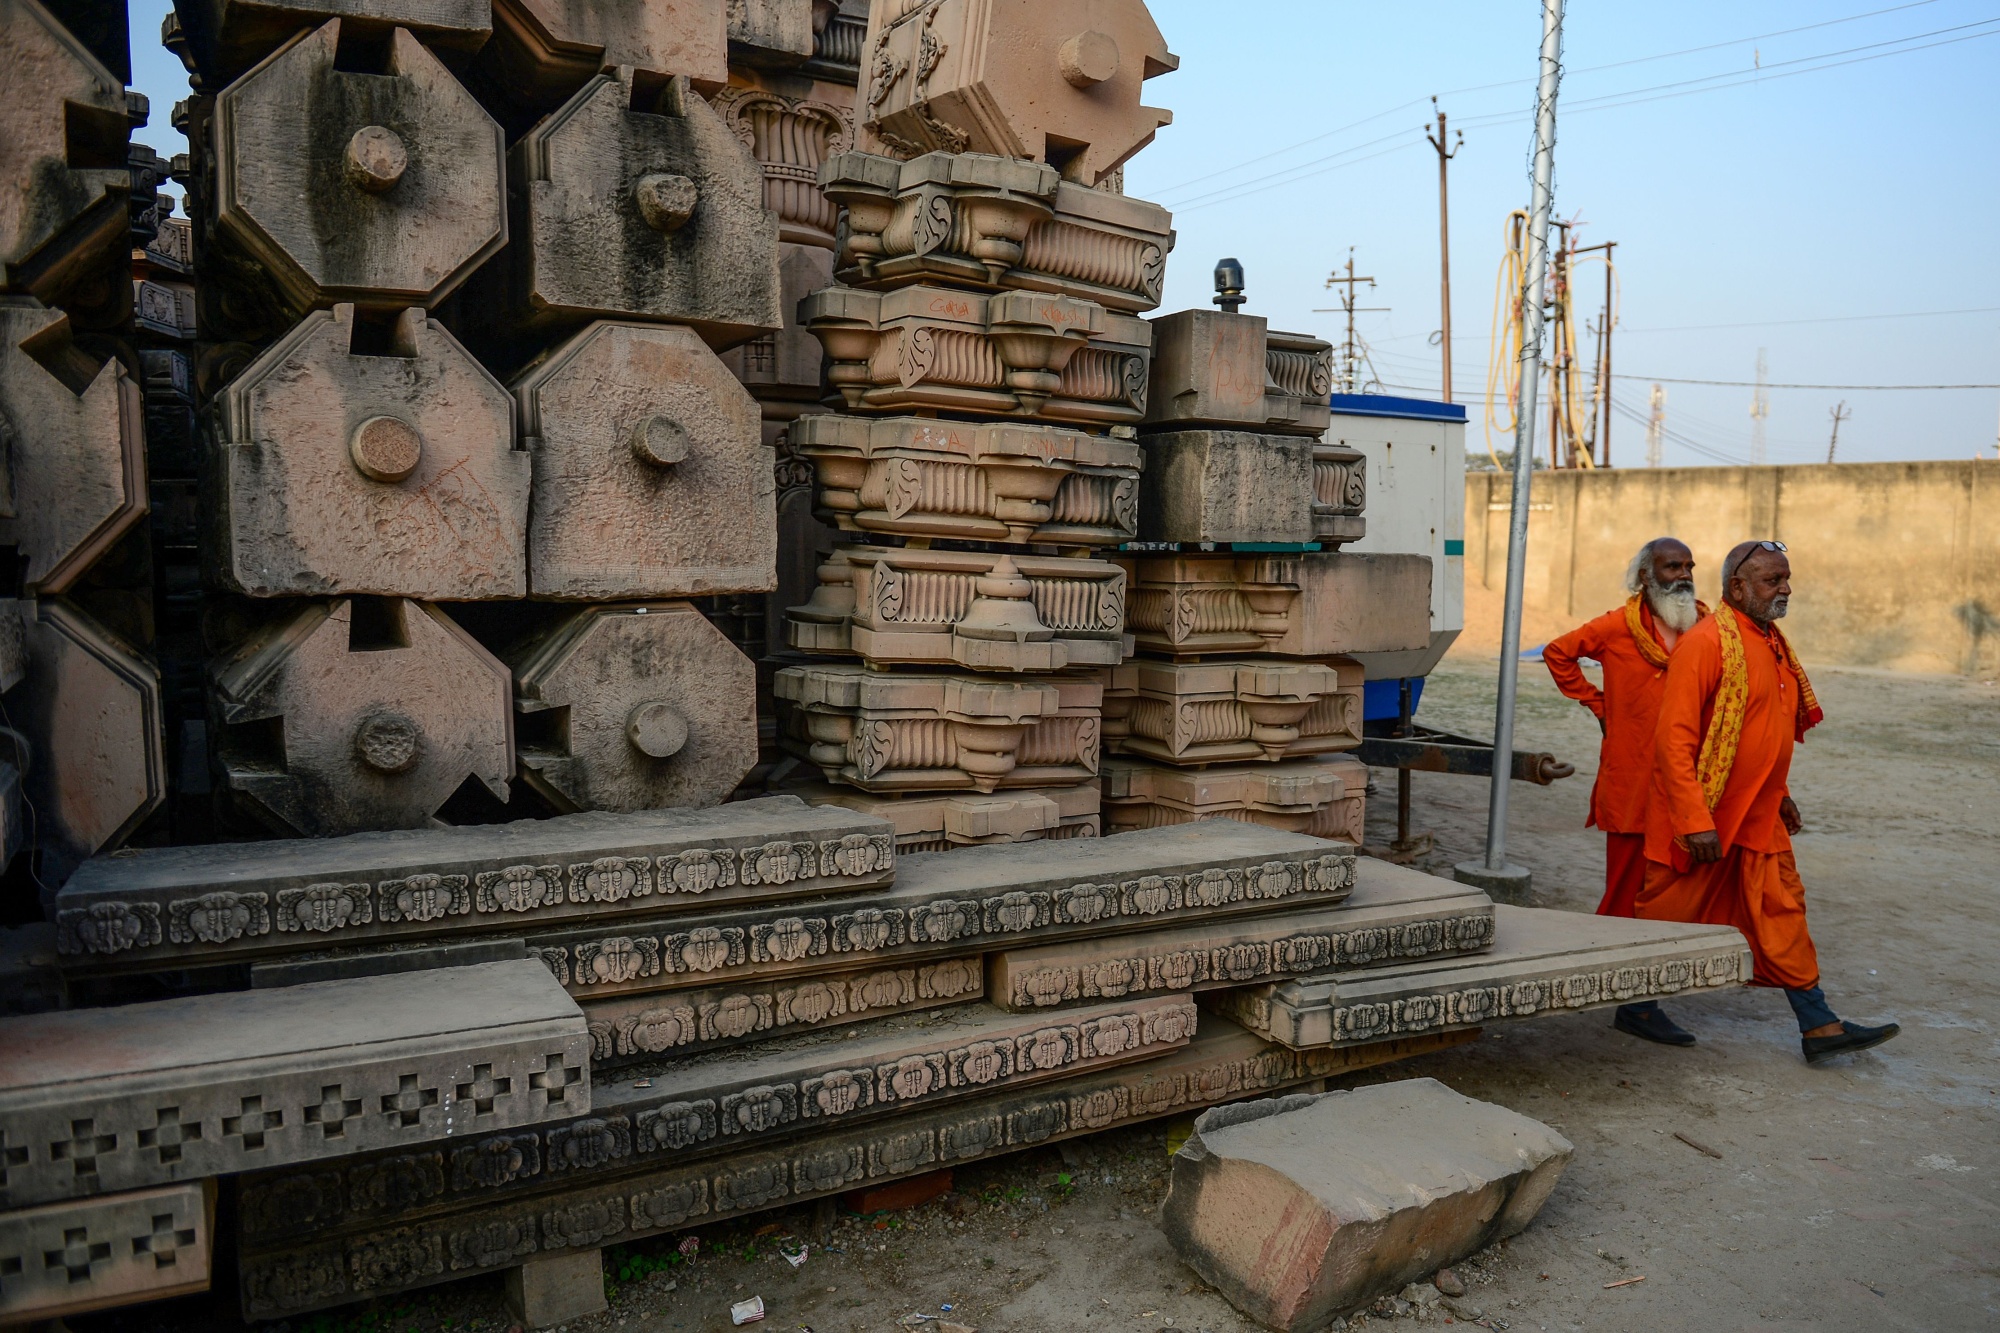 Stone slabs earmarked for the construction of a Hindu God Ram temple Ram Janmabhoomi Nyas workshop in Ayodhya, in Nov. 2019.